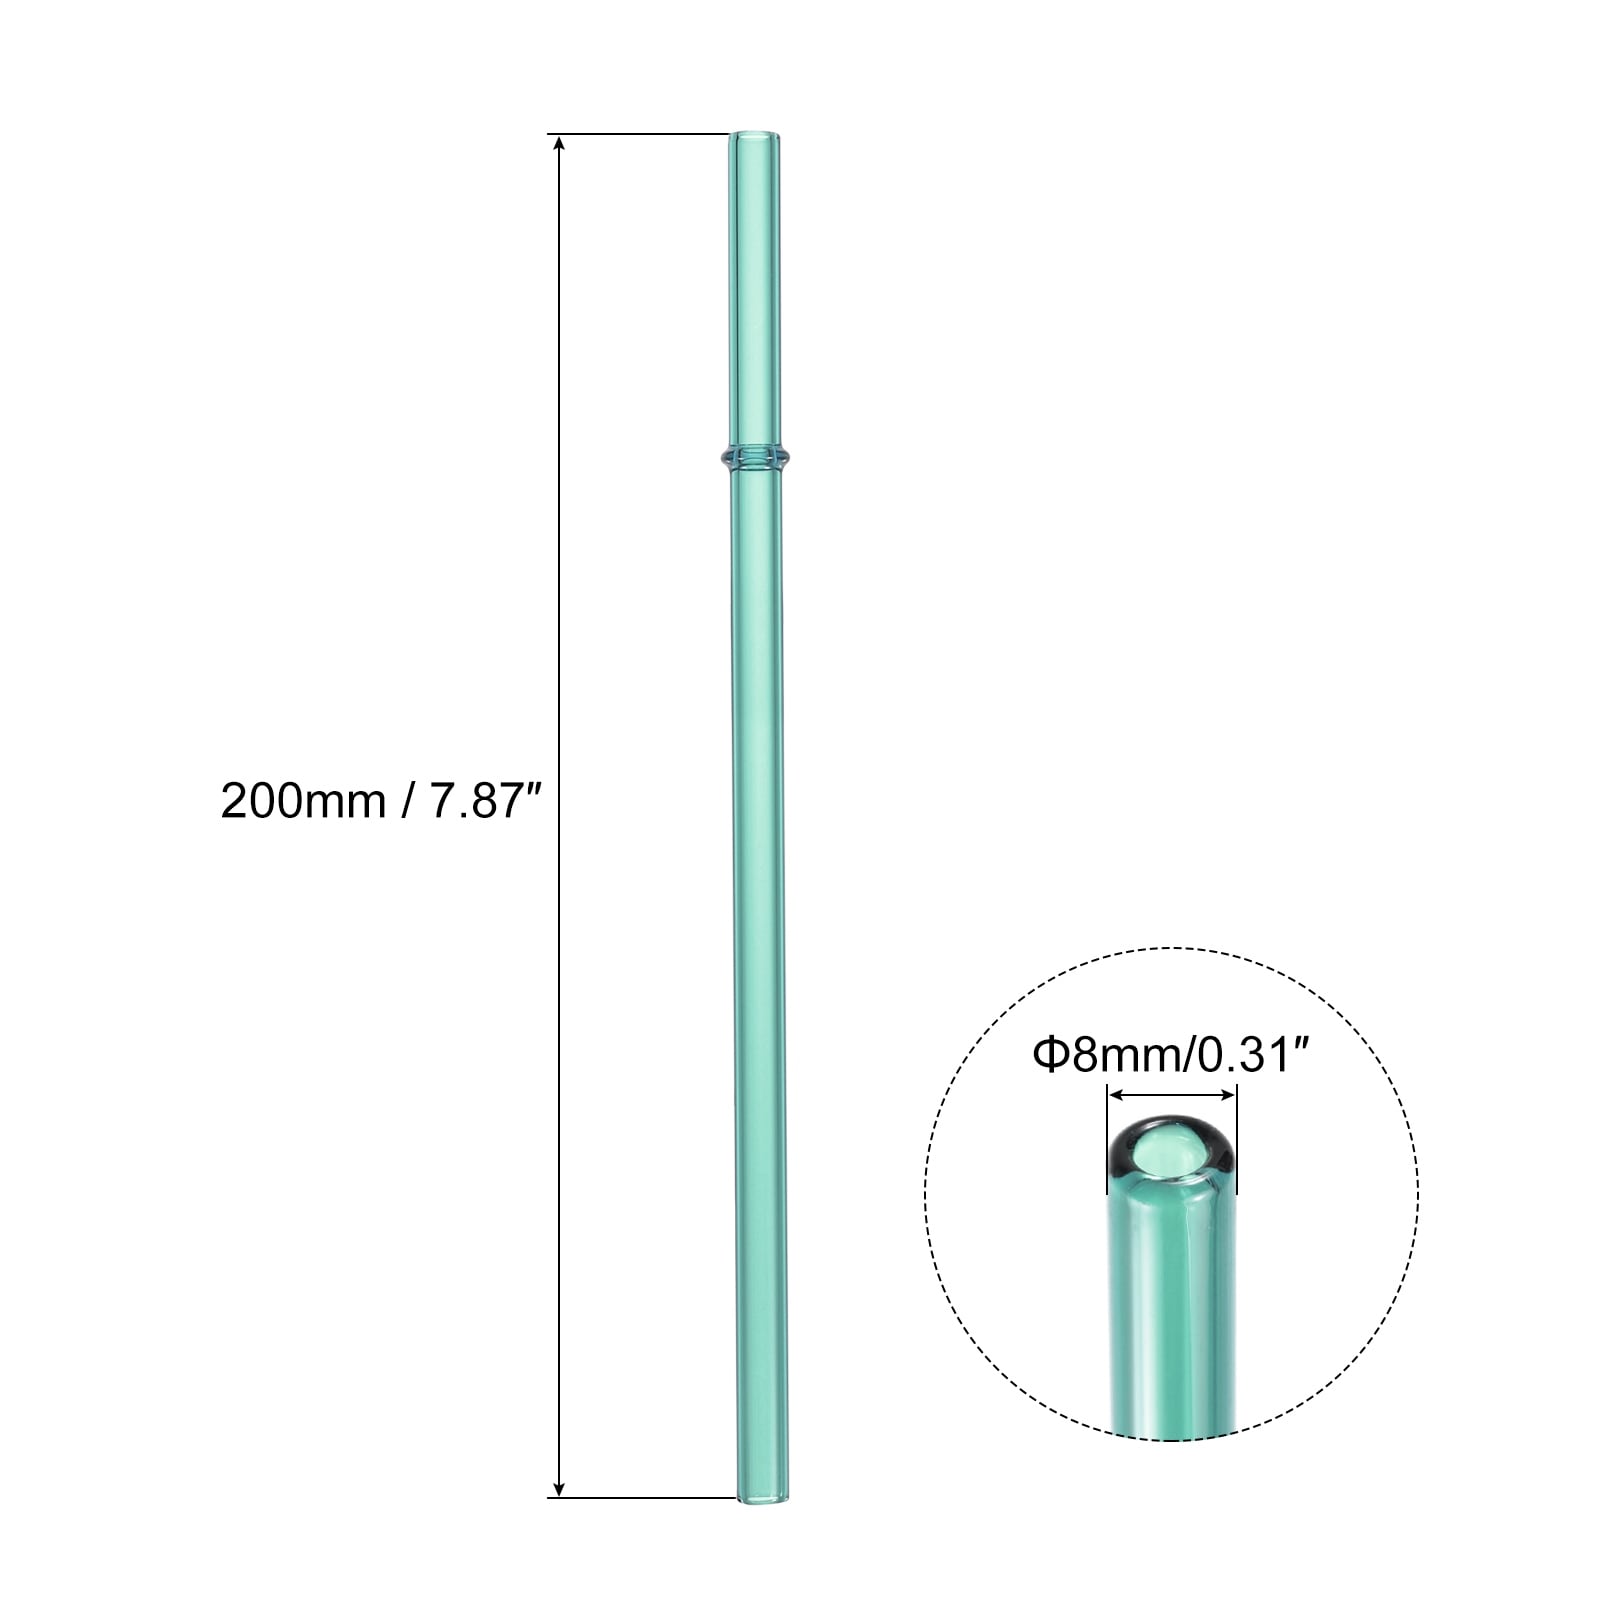 https://ak1.ostkcdn.com/images/products/is/images/direct/733bbee9e1a308de5c2fa65b239c719535a57f0f/6Pcs-Reusable-Glass-Straws%2C-200mm-8inch-Long%2C-8mm-0.3%22-Dia-Cute-Straws.jpg